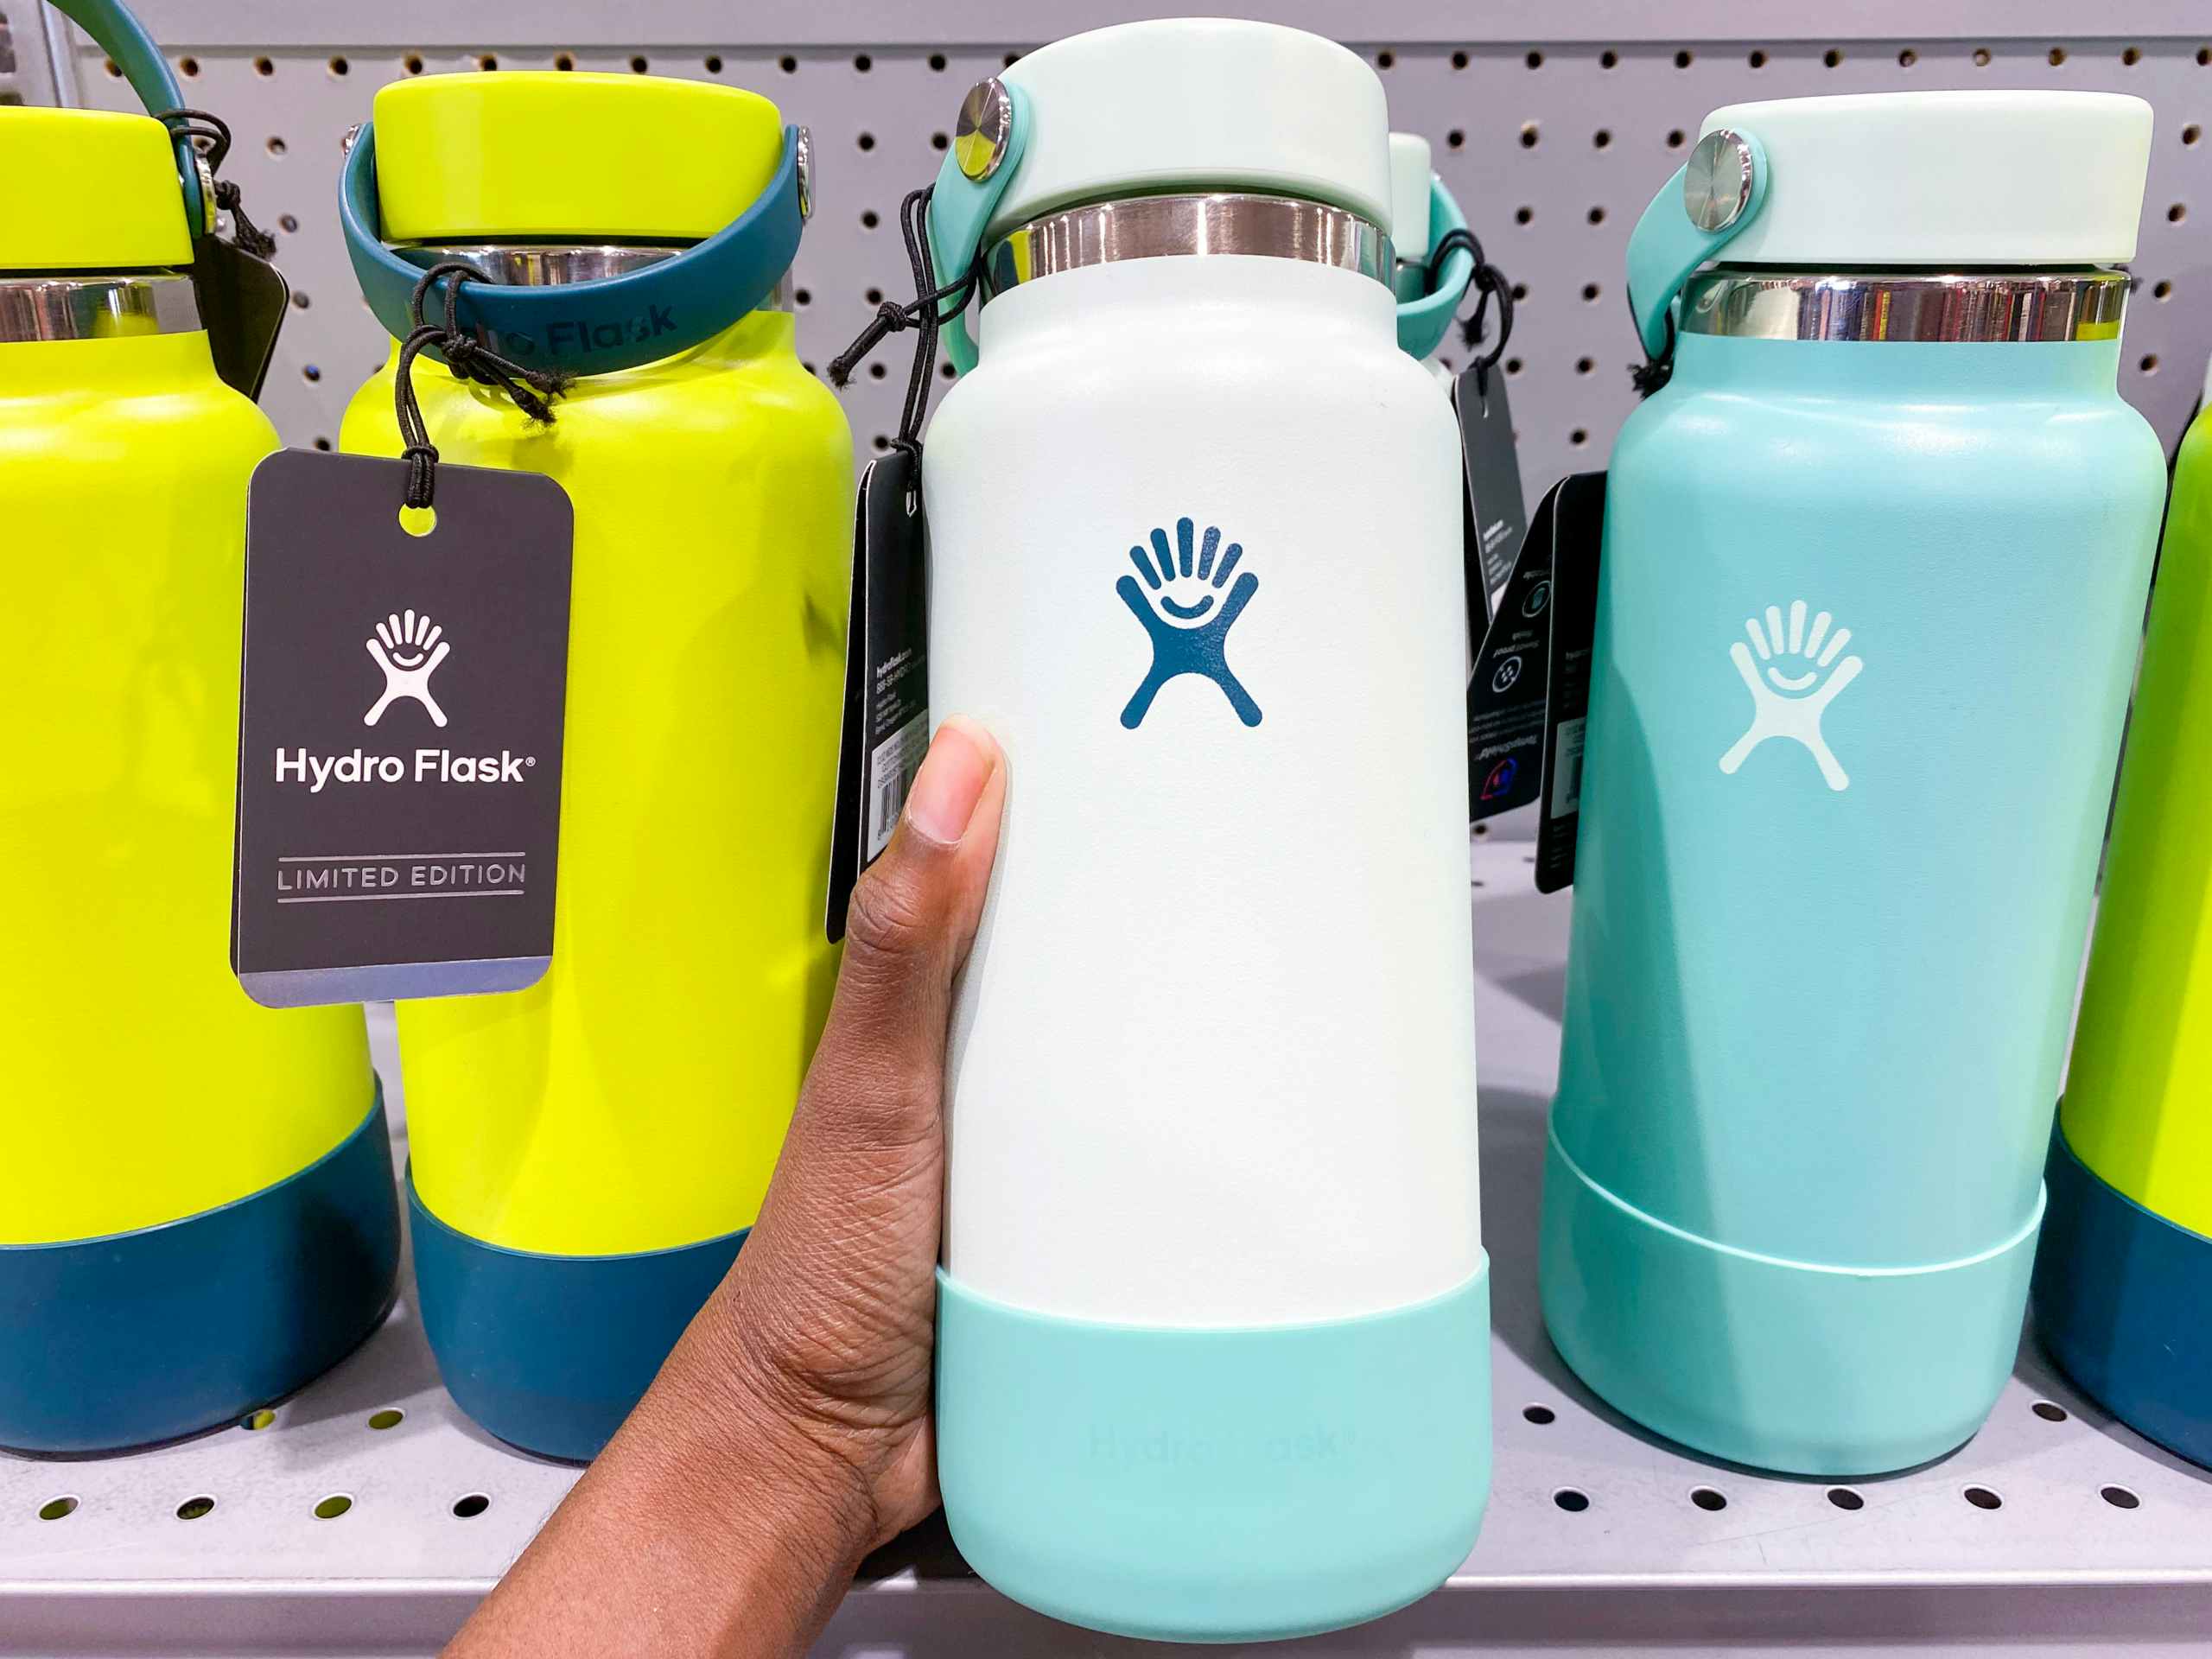 a hydroflask being held in front of a display of other hydrflasks